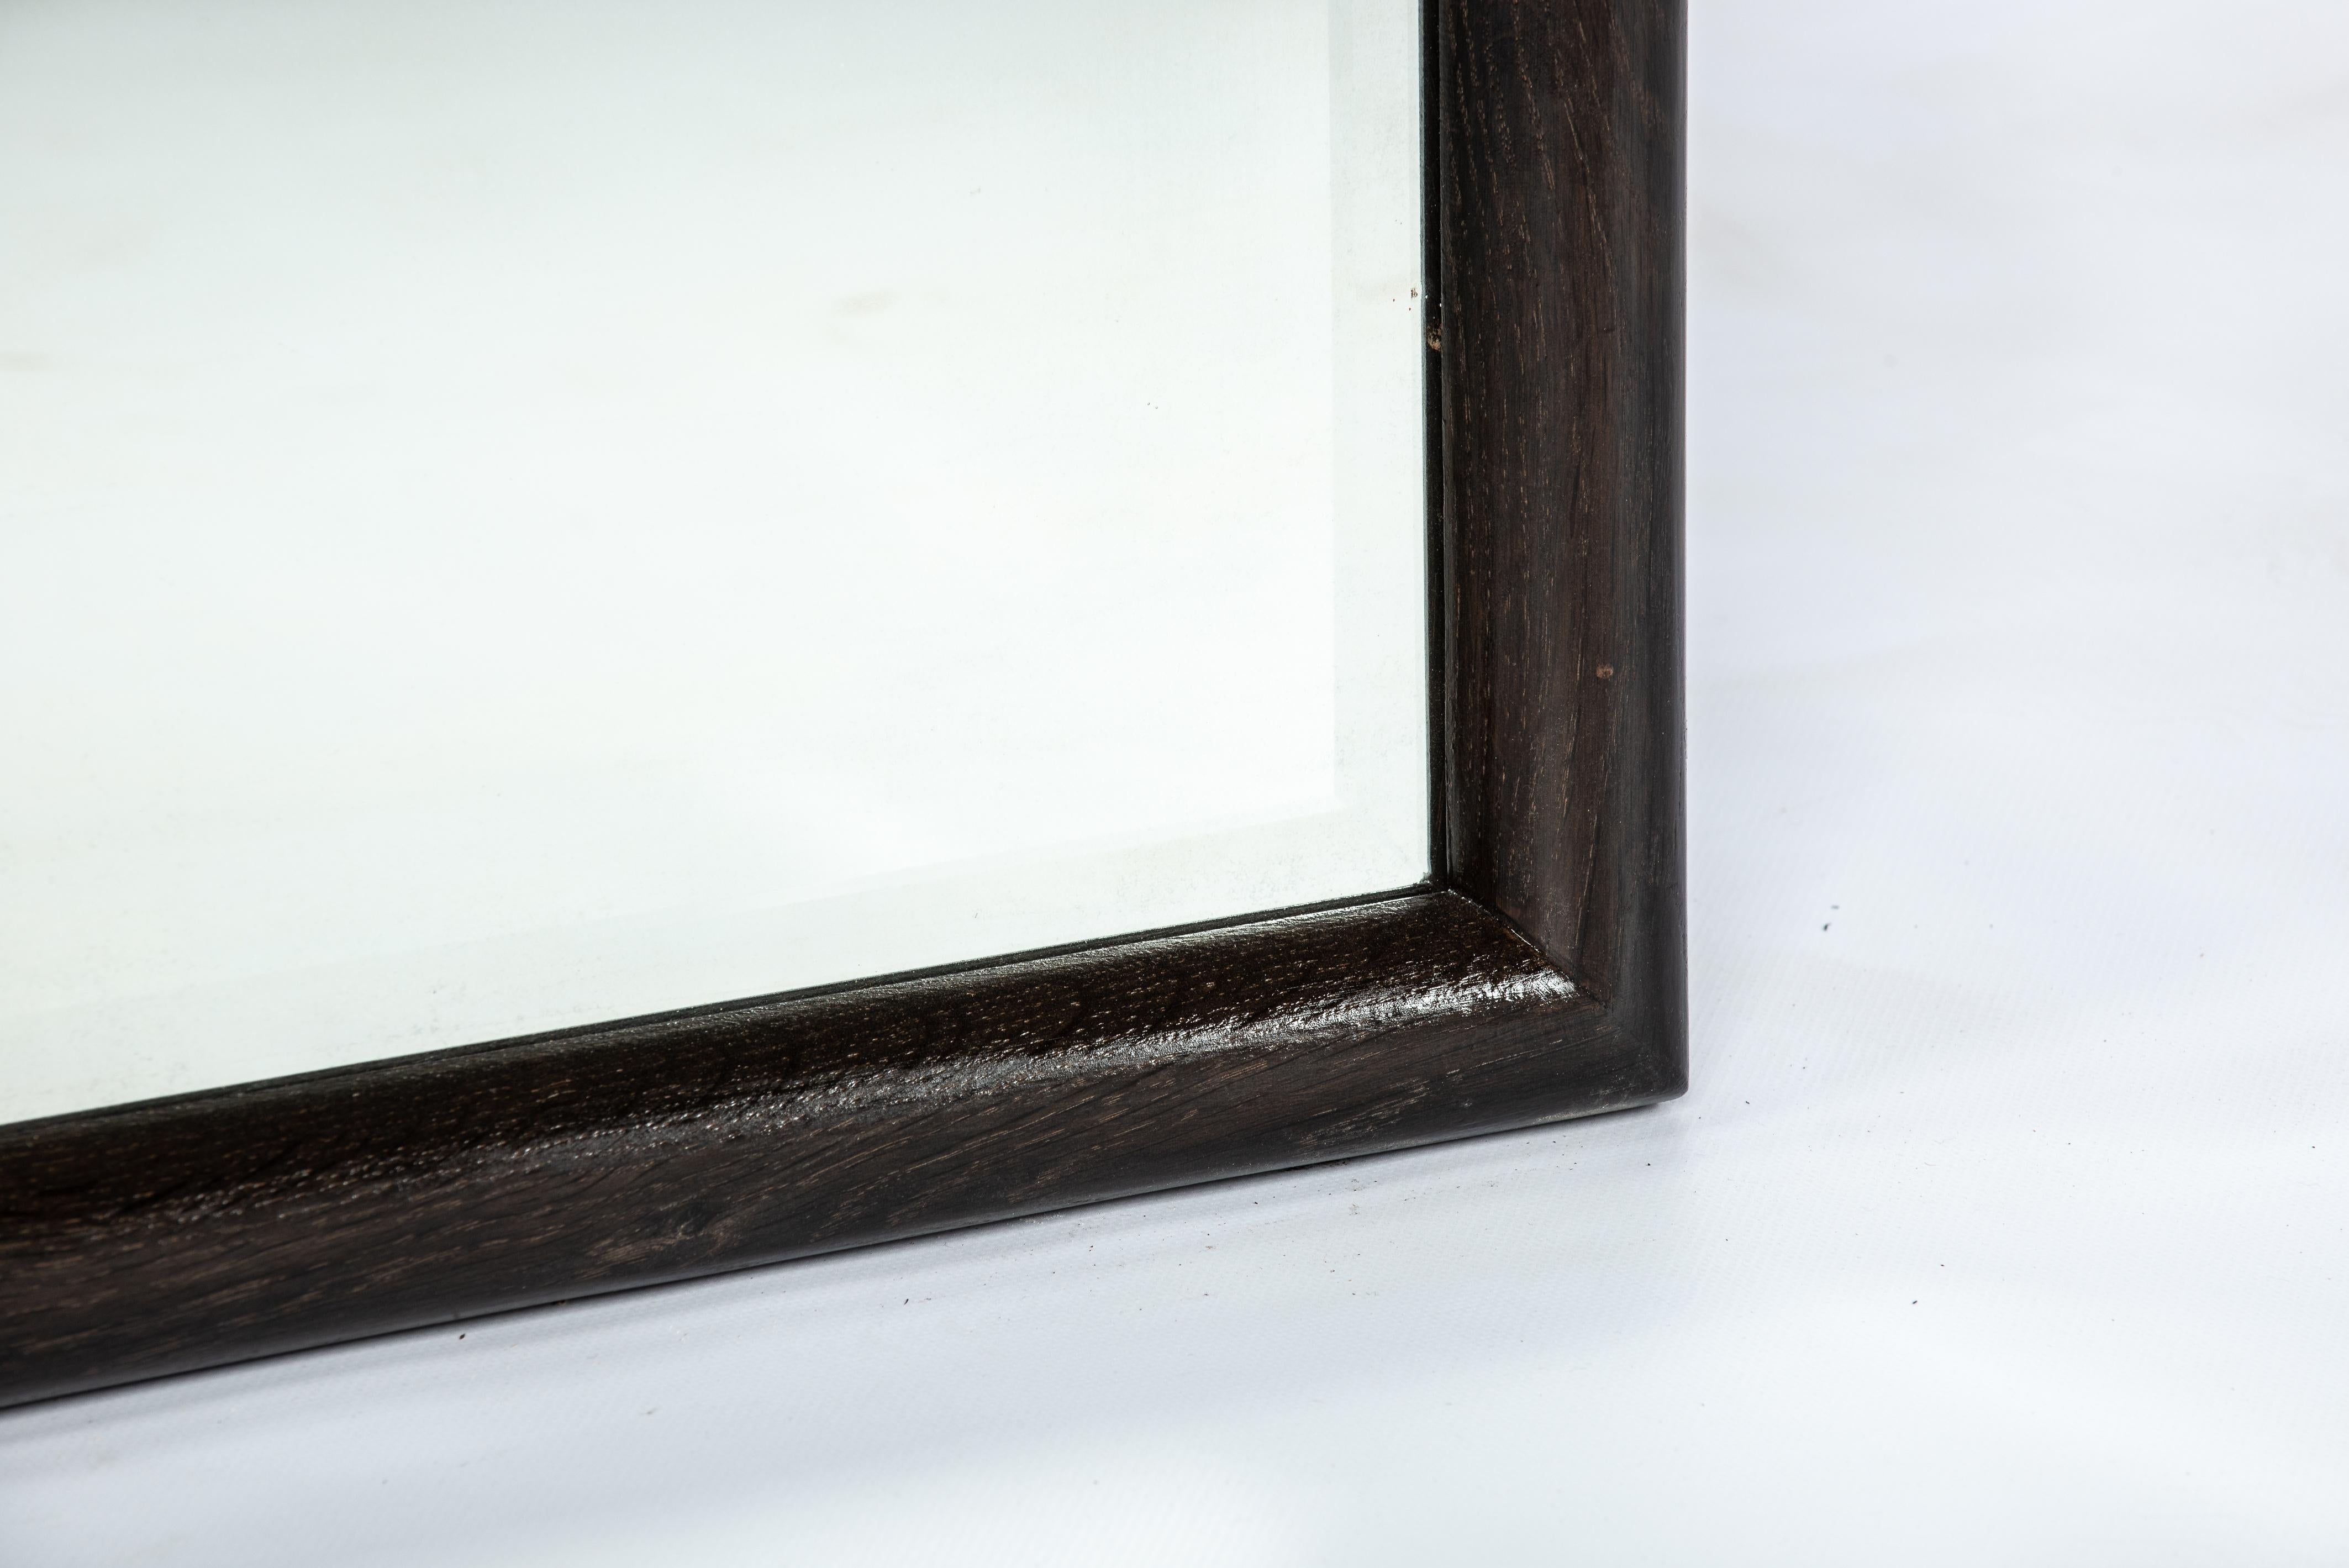 Presenting a stunning antique beveled mirror enclosed in a sleek solid oak frame. The amalgamation of the antique glass and the newly crafted wooden frame exudes elegance. The mirror plate features beveled edges and dates back to around 1880. This